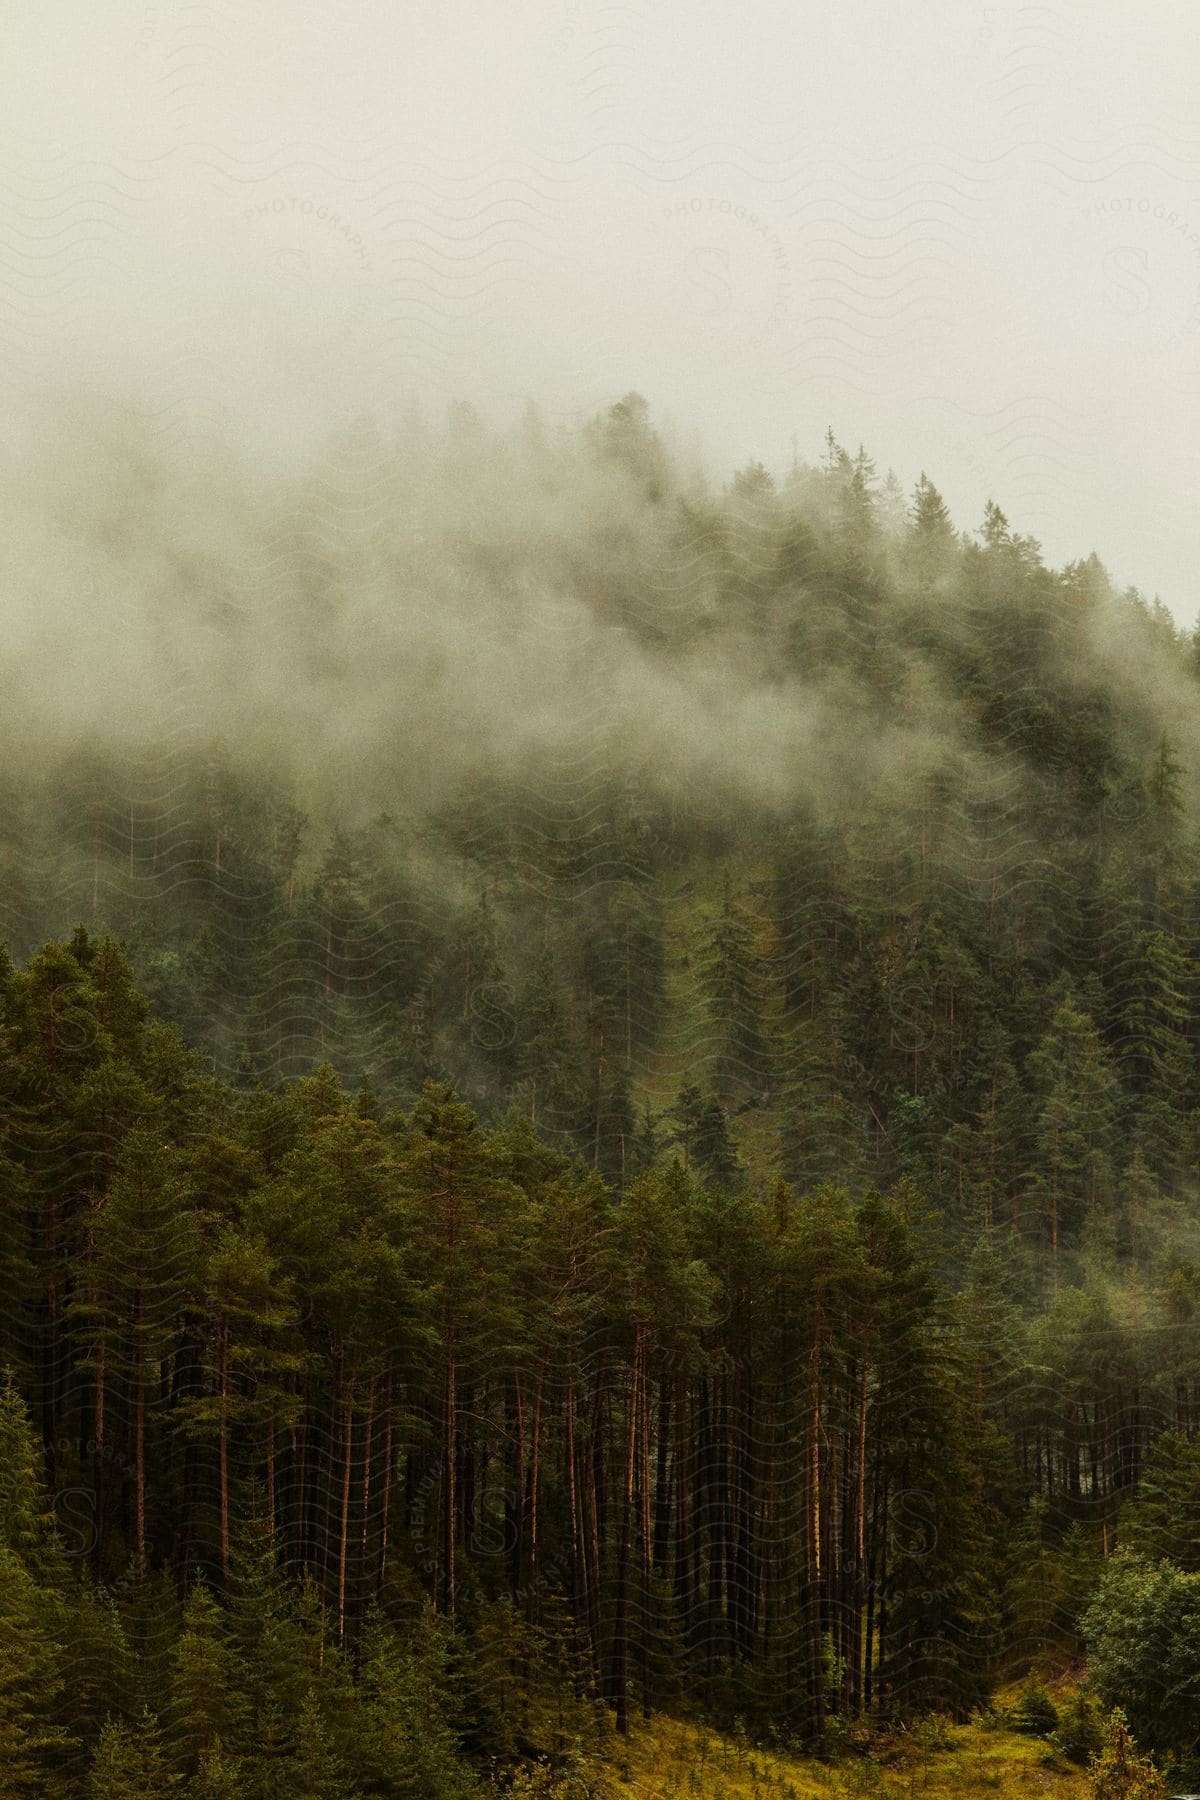 A forest with tall trees covered in fog during the day.